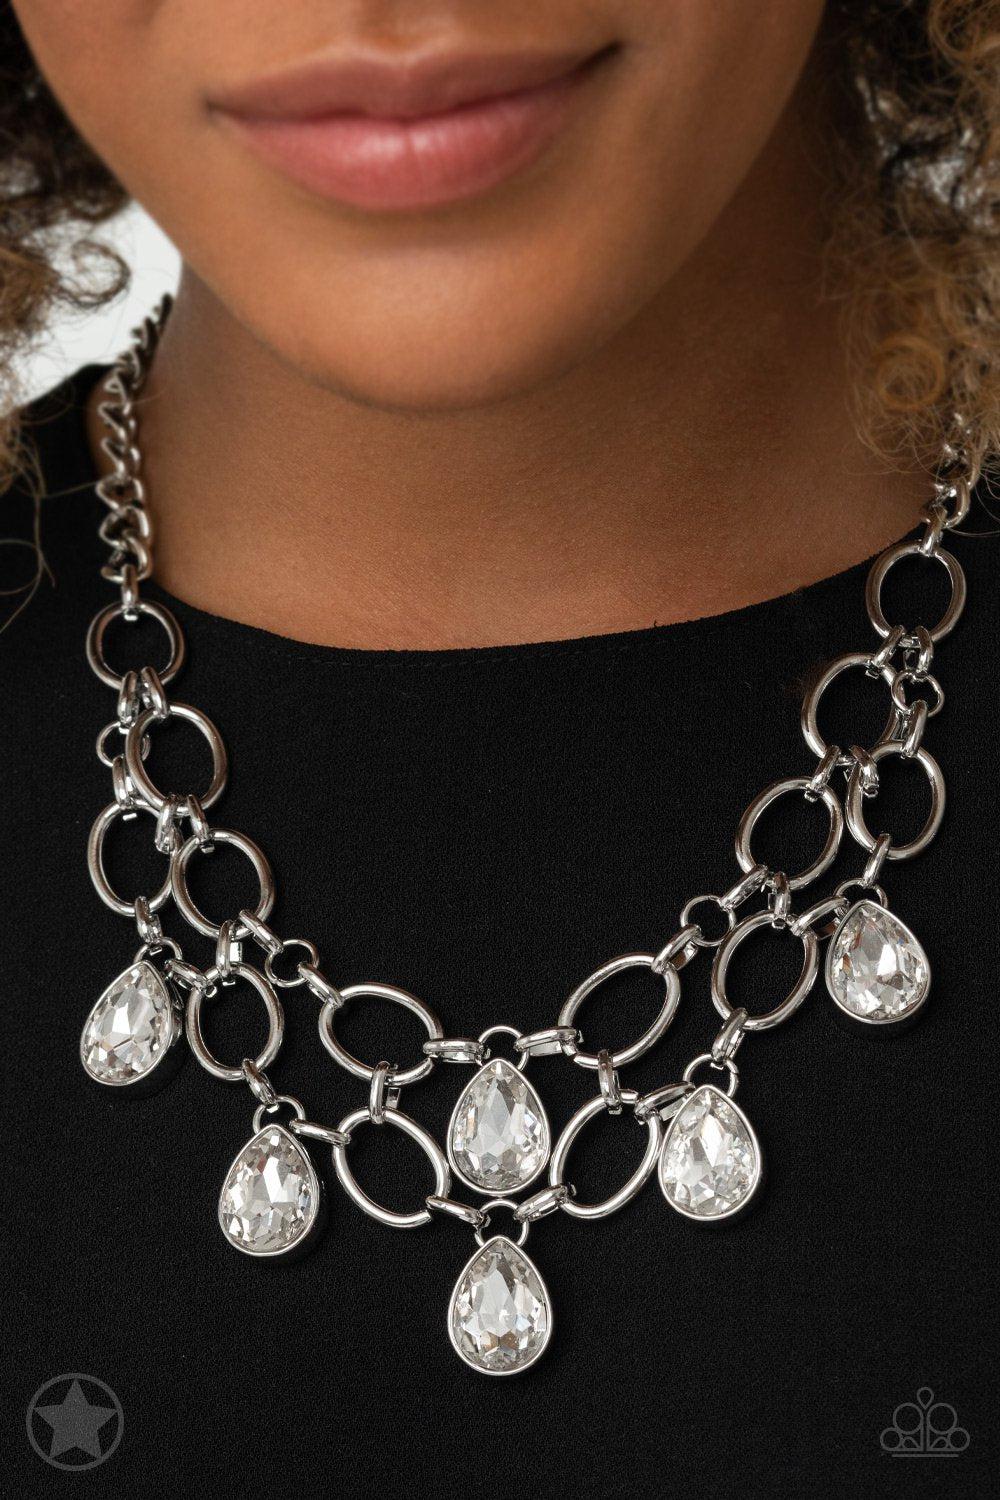 Show-Stopping Shimmer White Rhinestone Necklace - Paparazzi Accessories - model -CarasShop.com - $5 Jewelry by Cara Jewels